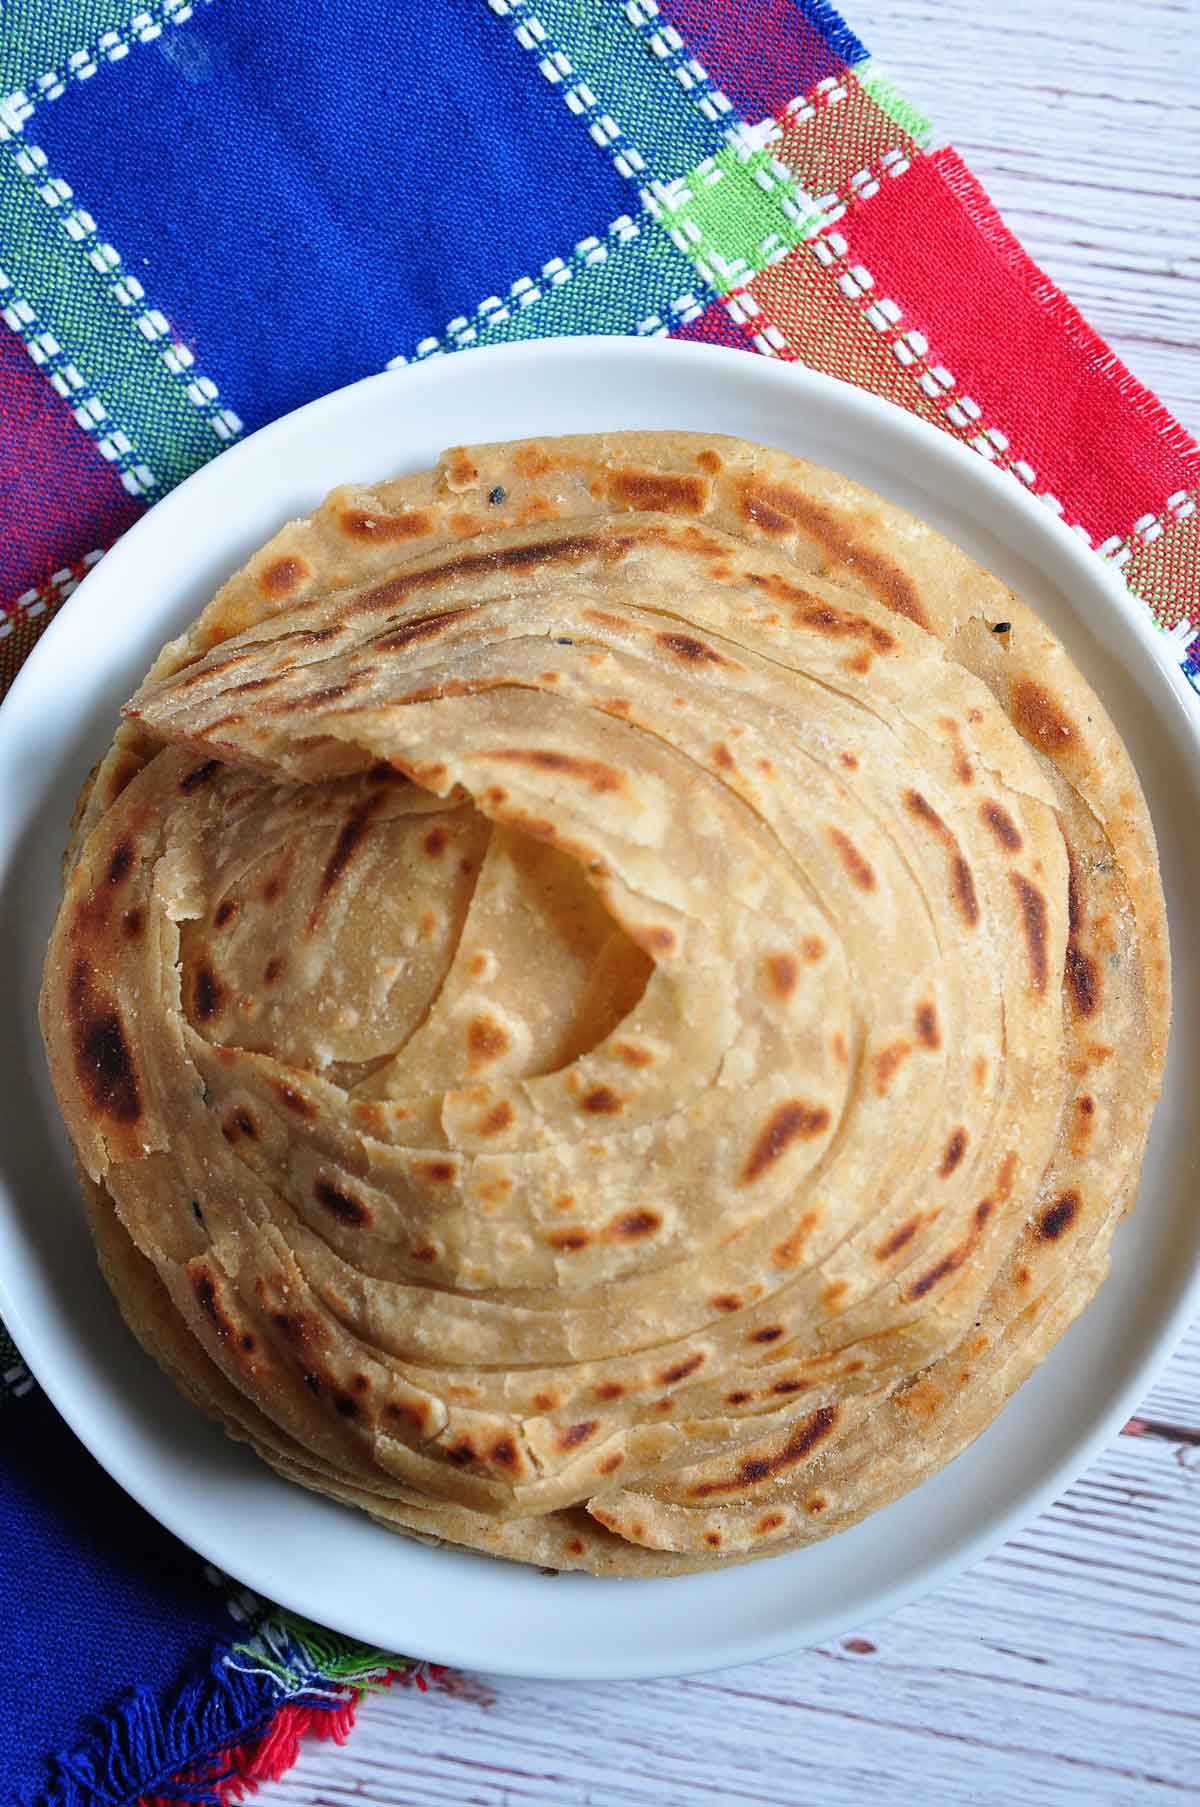 Layered flaky flat bread in a plate.